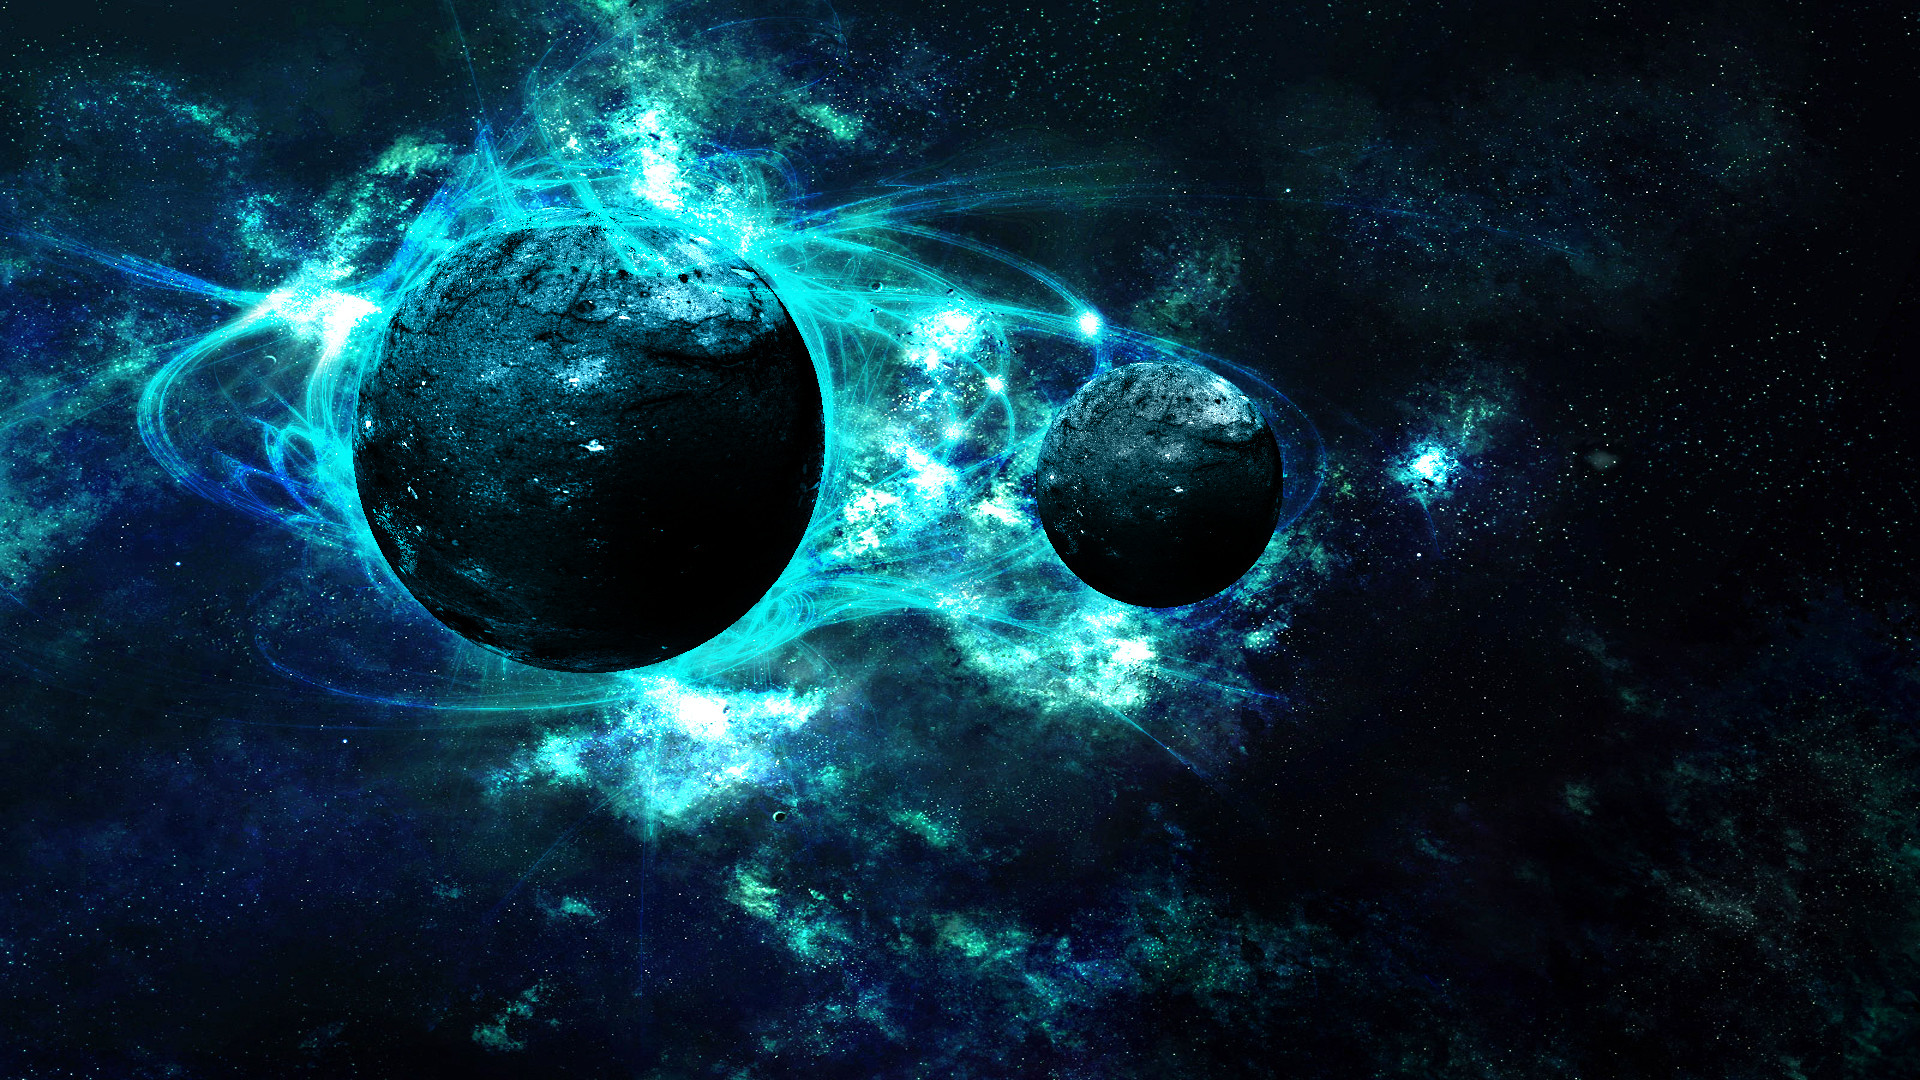 1920x1080 Space/Fantasy Wallpaper Set 62 | Awesome Wallpapers